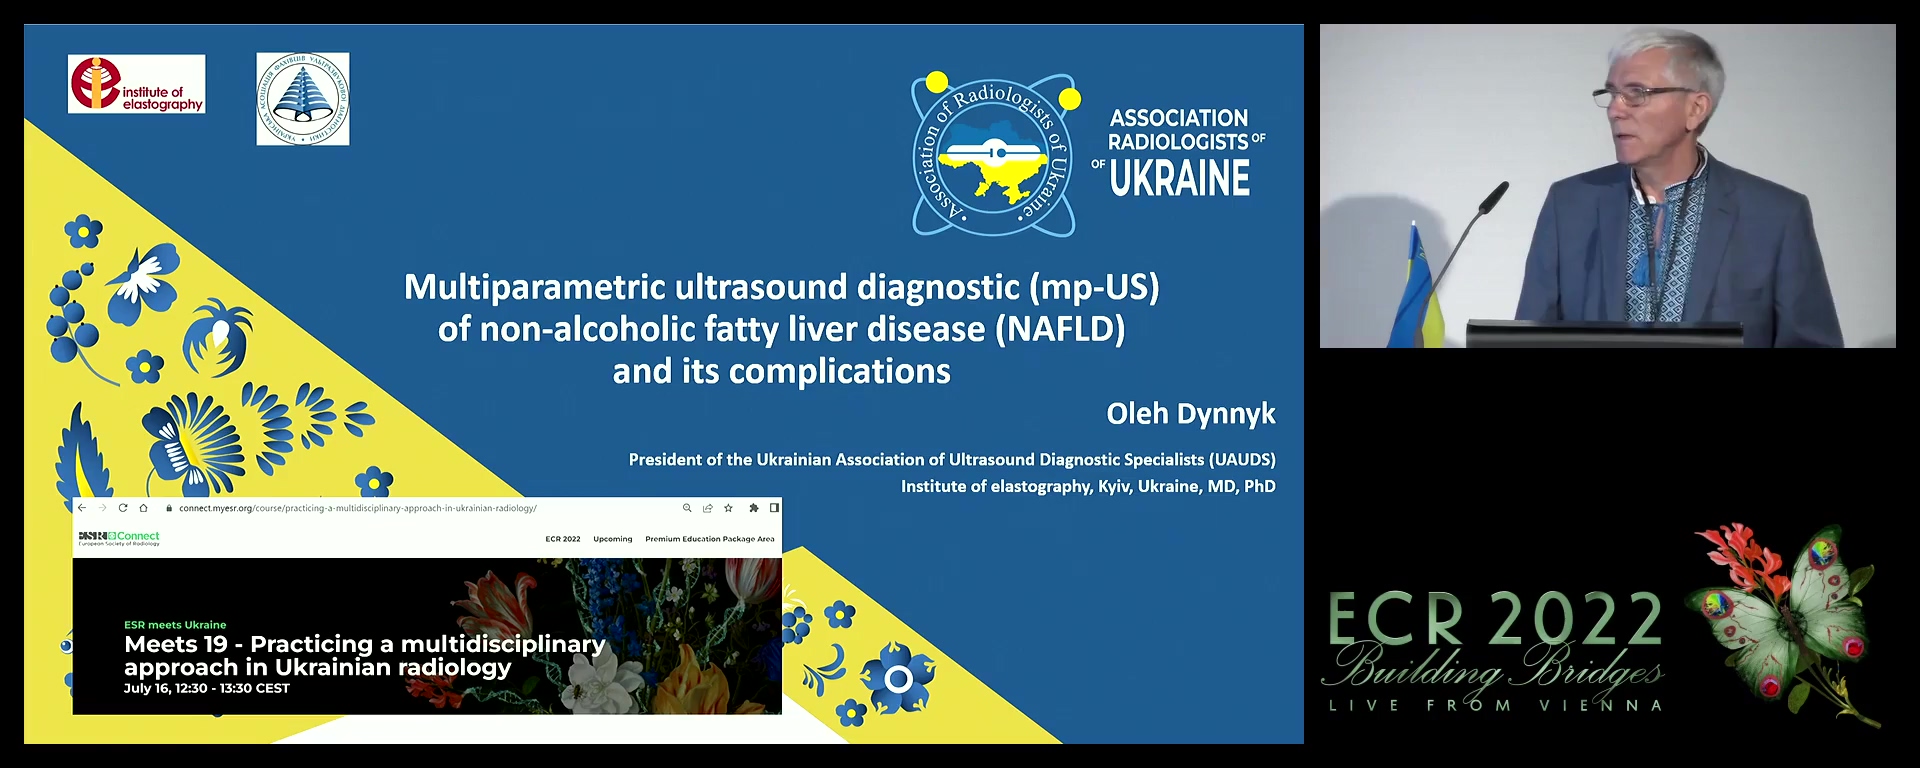 Multiparametric ultrasound diagnostic (mp-US) of non-alcoholic fatty liver disease (NAFLD) and ist complications